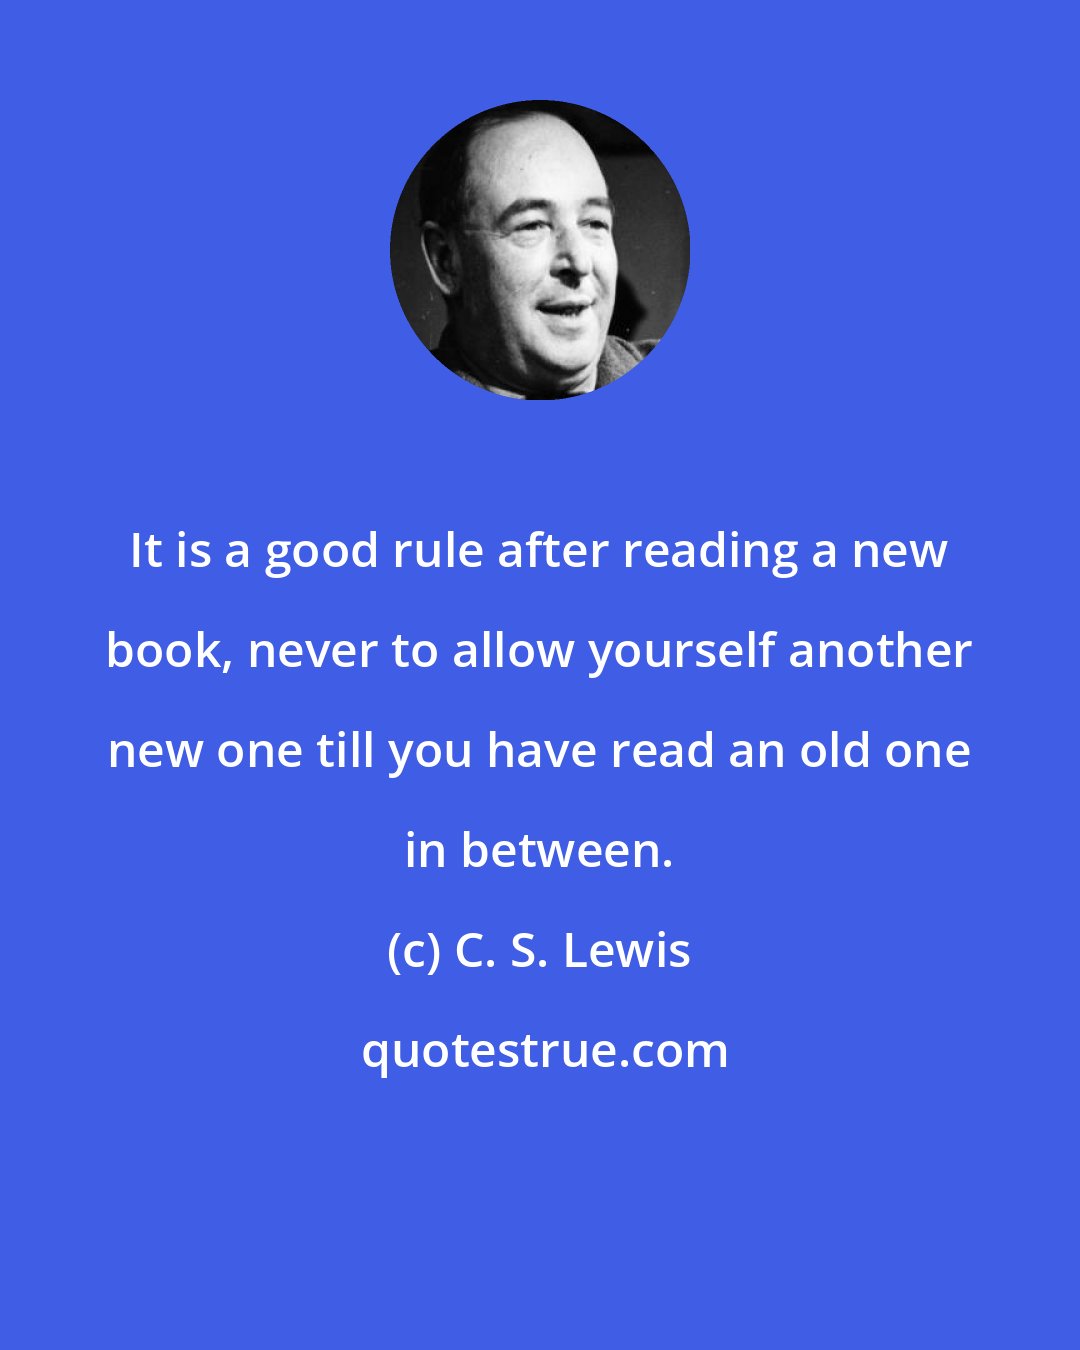 C. S. Lewis: It is a good rule after reading a new book, never to allow yourself another new one till you have read an old one in between.